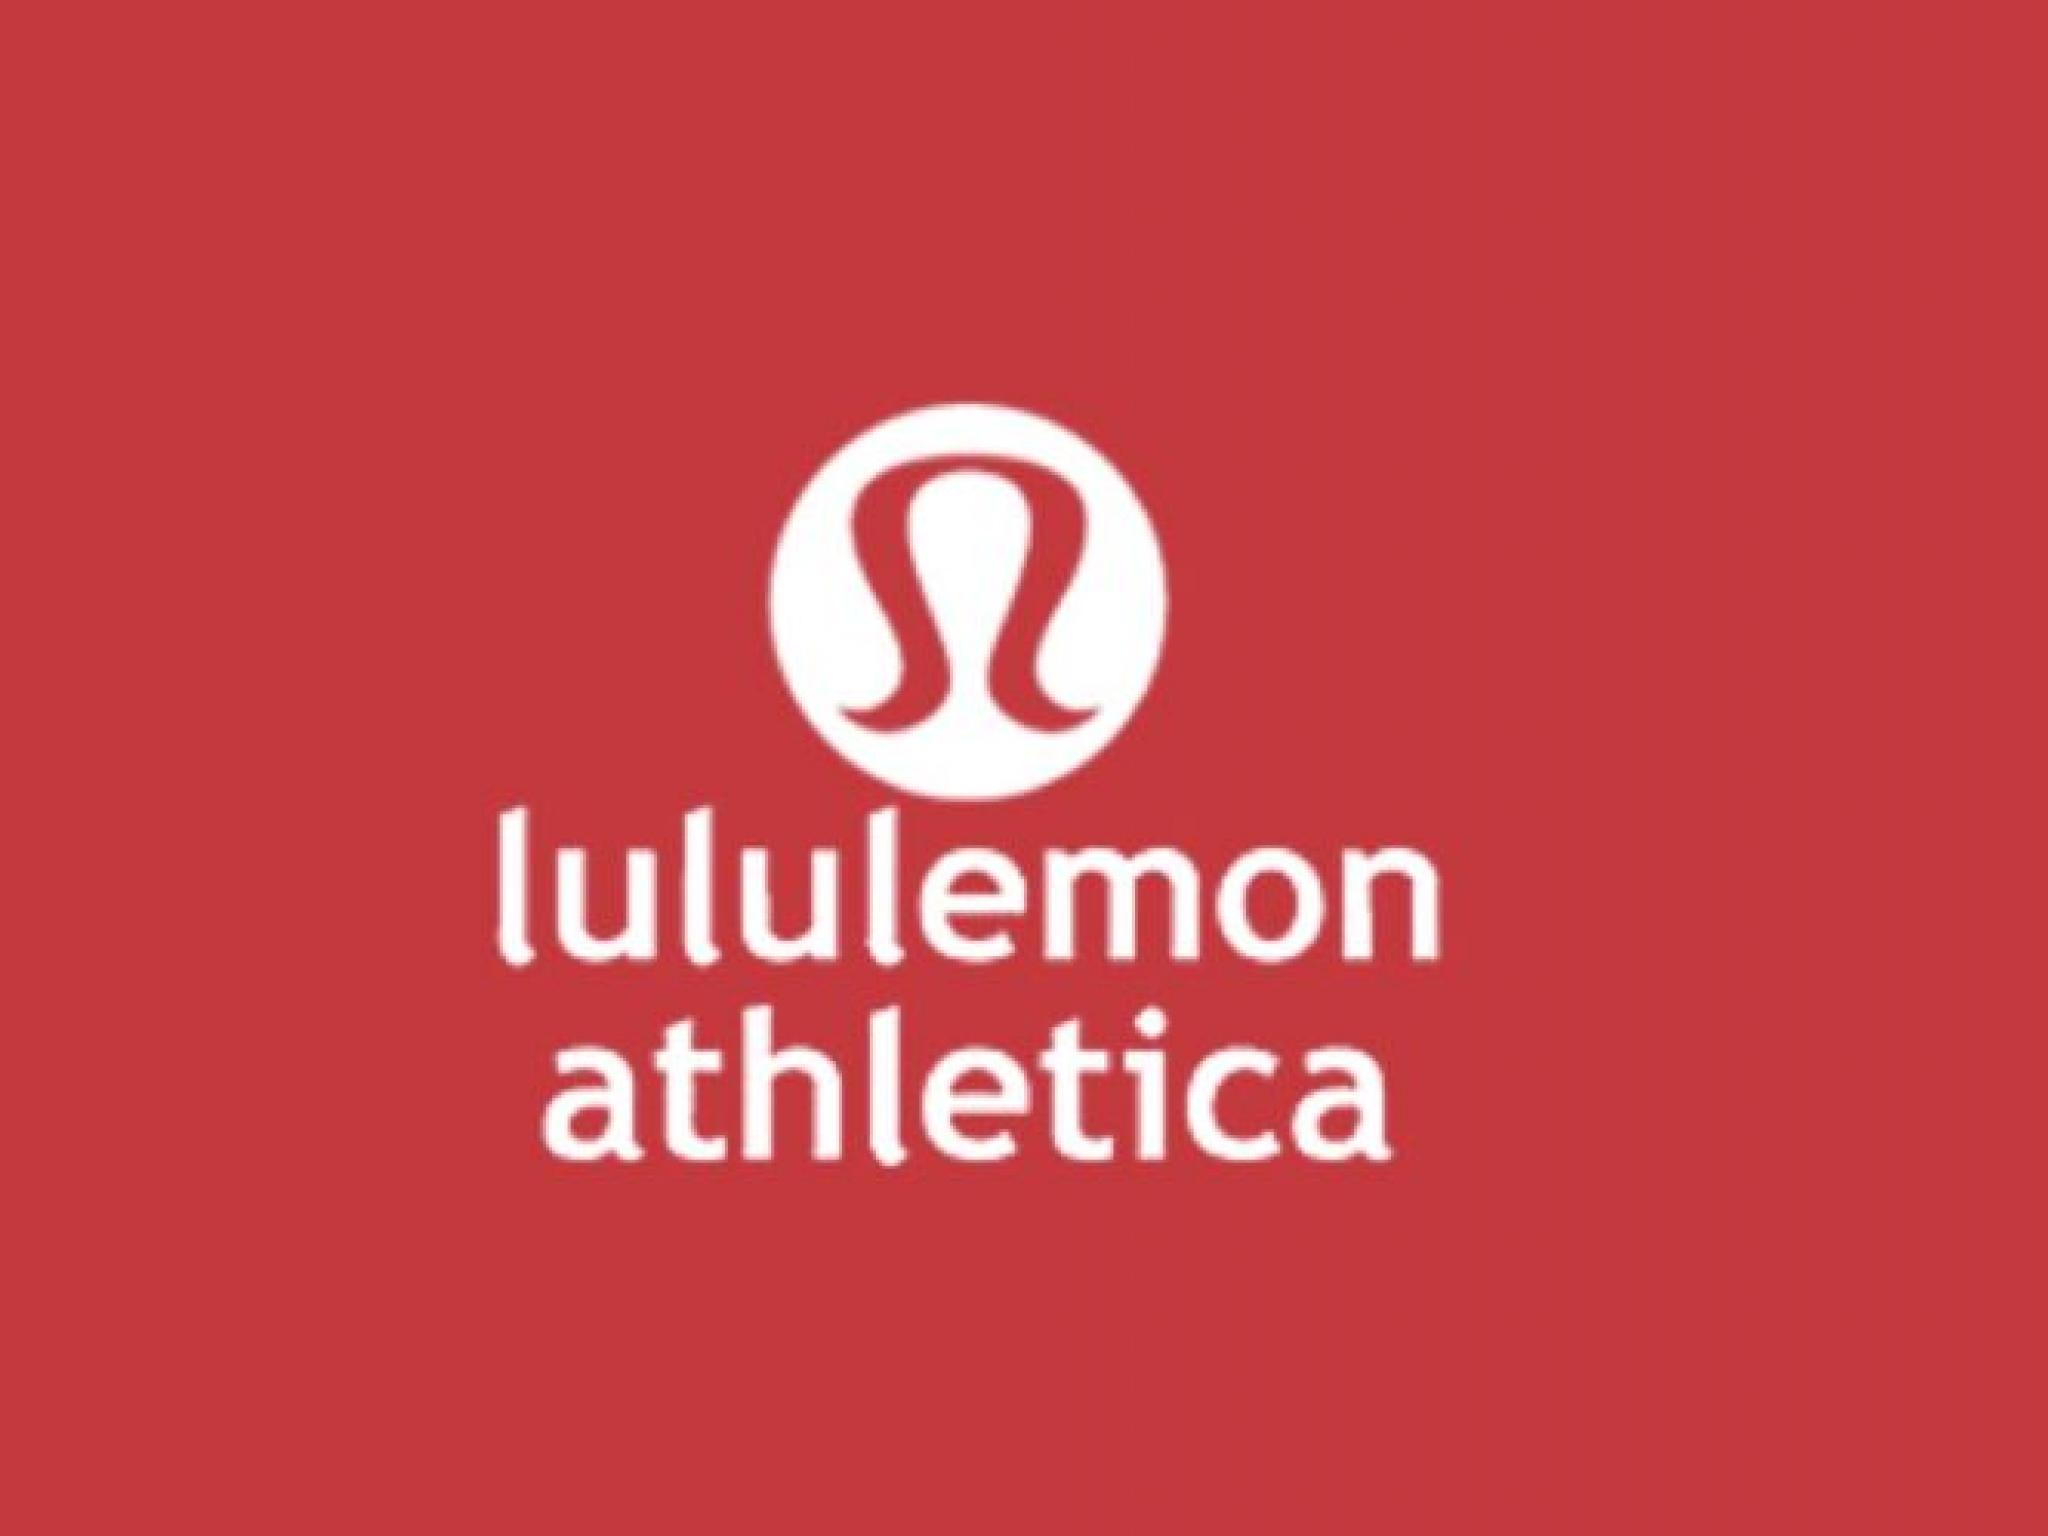  lululemon-to-rally-around-45-here-are-10-top-analyst-forecasts-for-thursday 